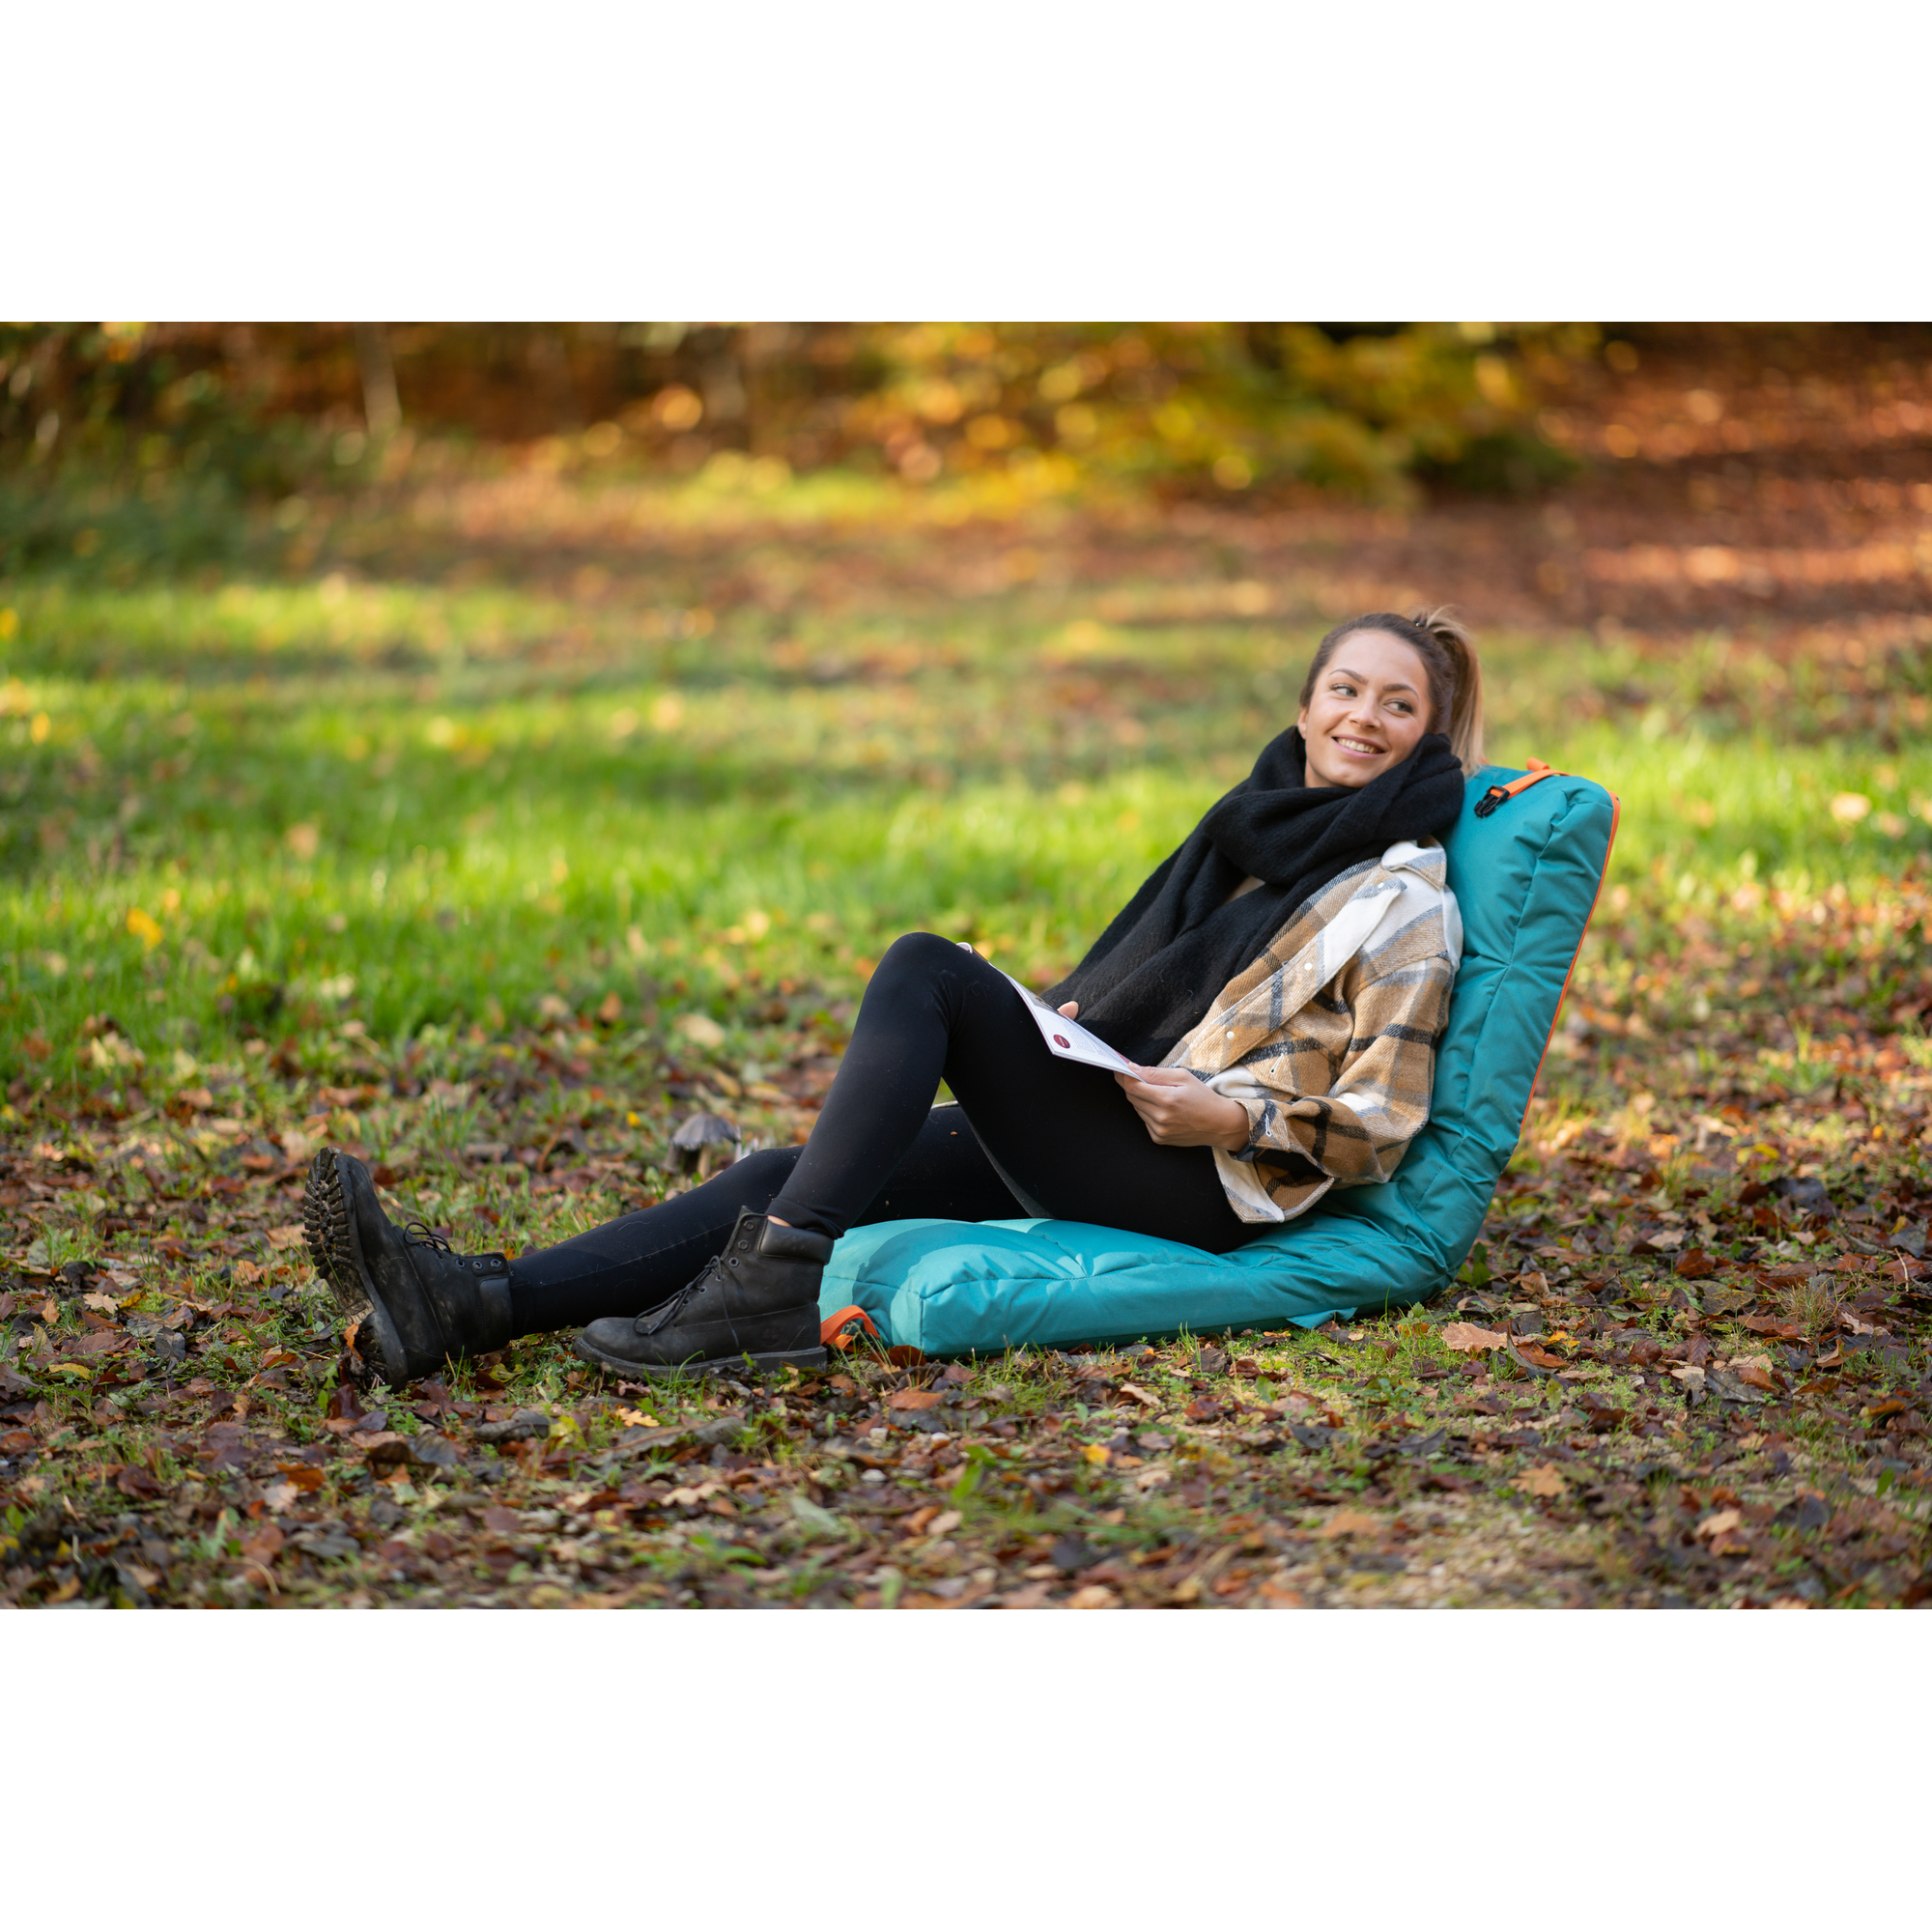 Bodensessel Lounger 'Big Sur' petrol Polyester 128 x 52 x 15 cm + product picture